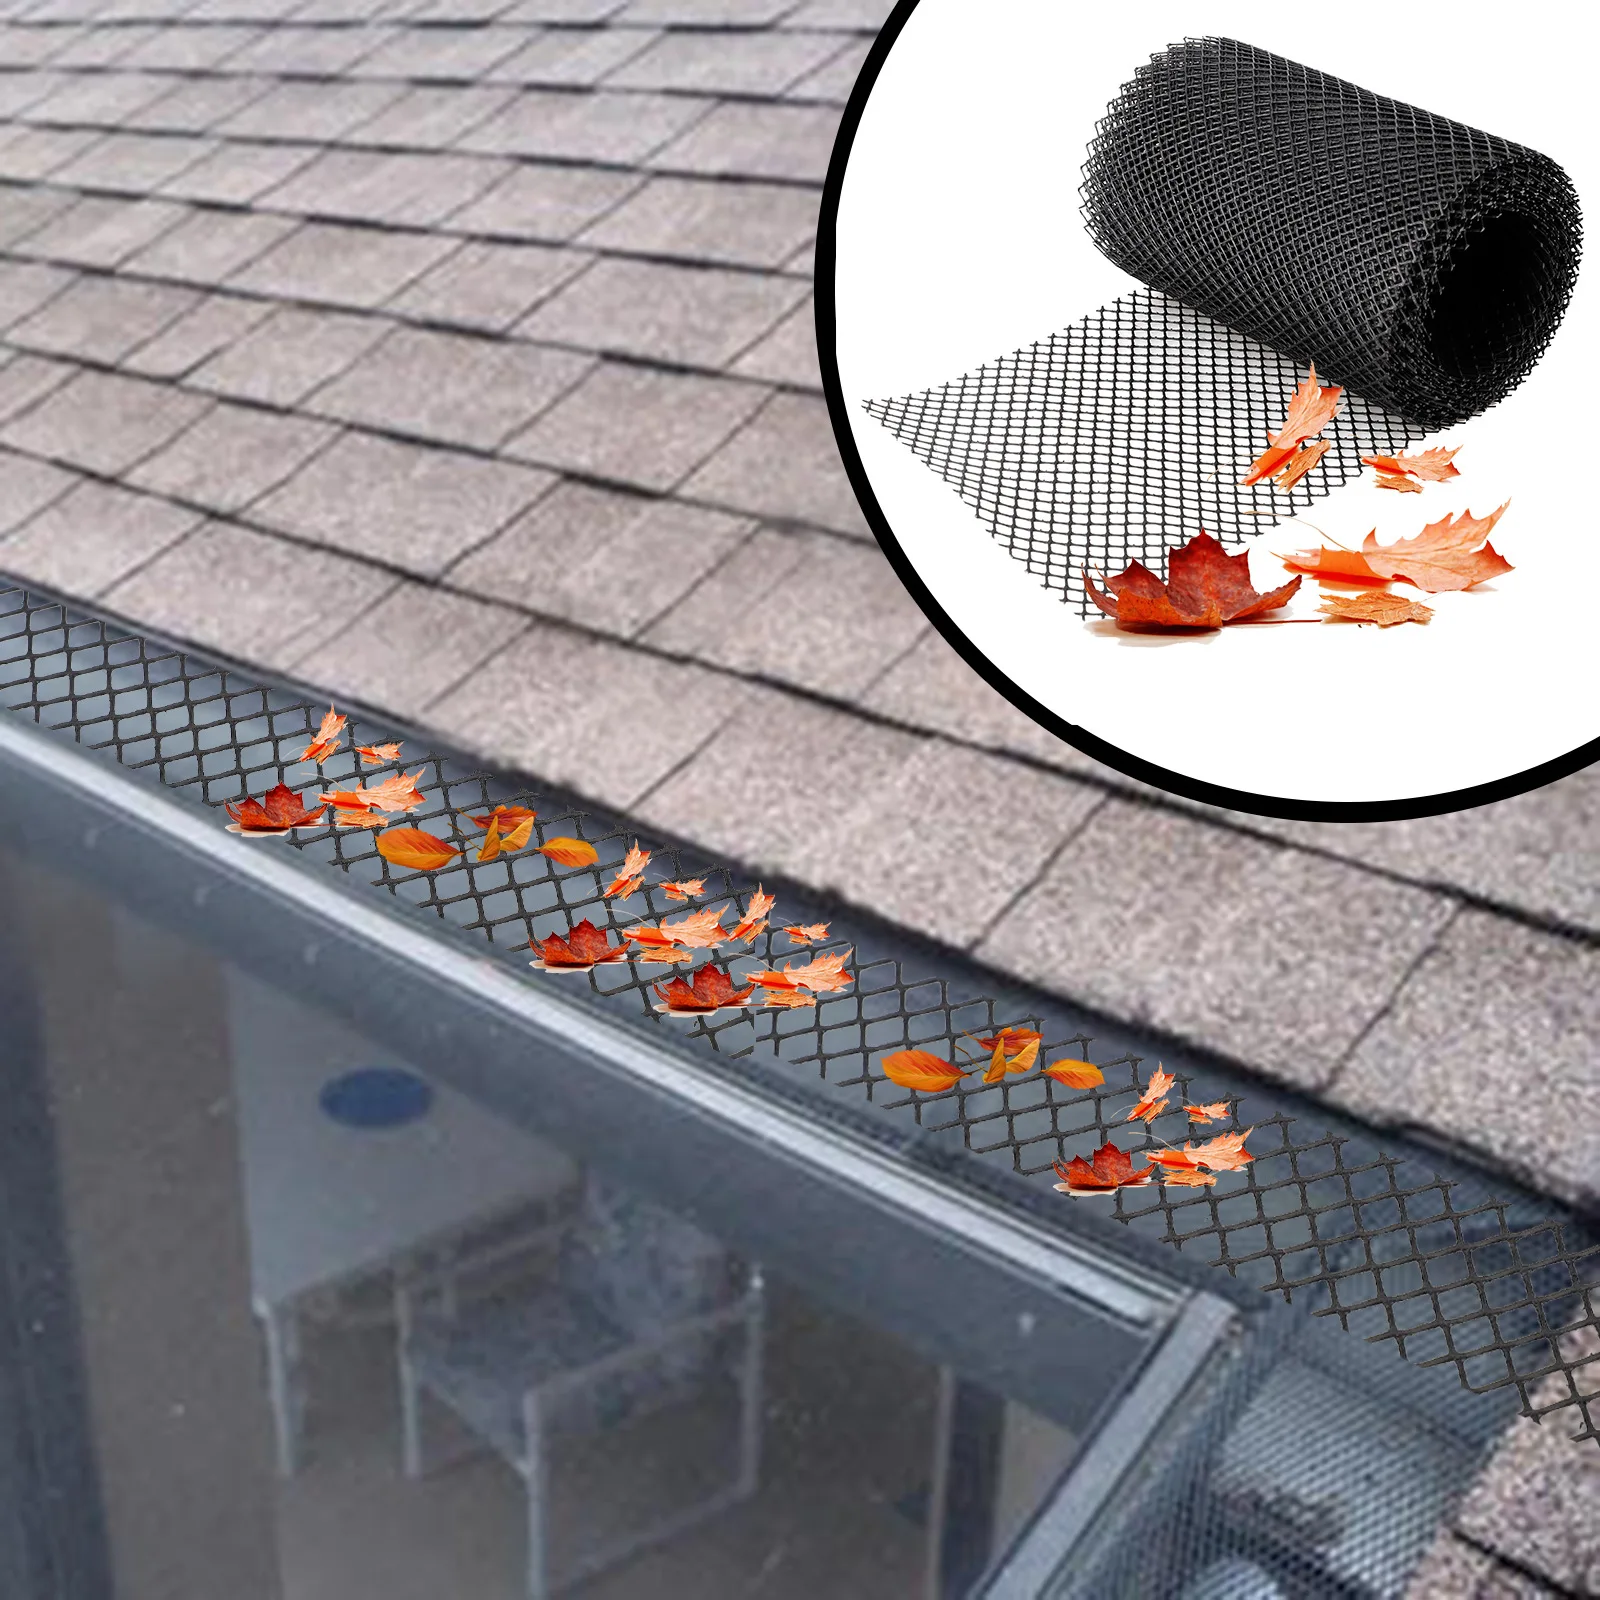 5M Gutter Guard Roof Mesh Net Guttering Cover with Clips Stops Debris Leaves 